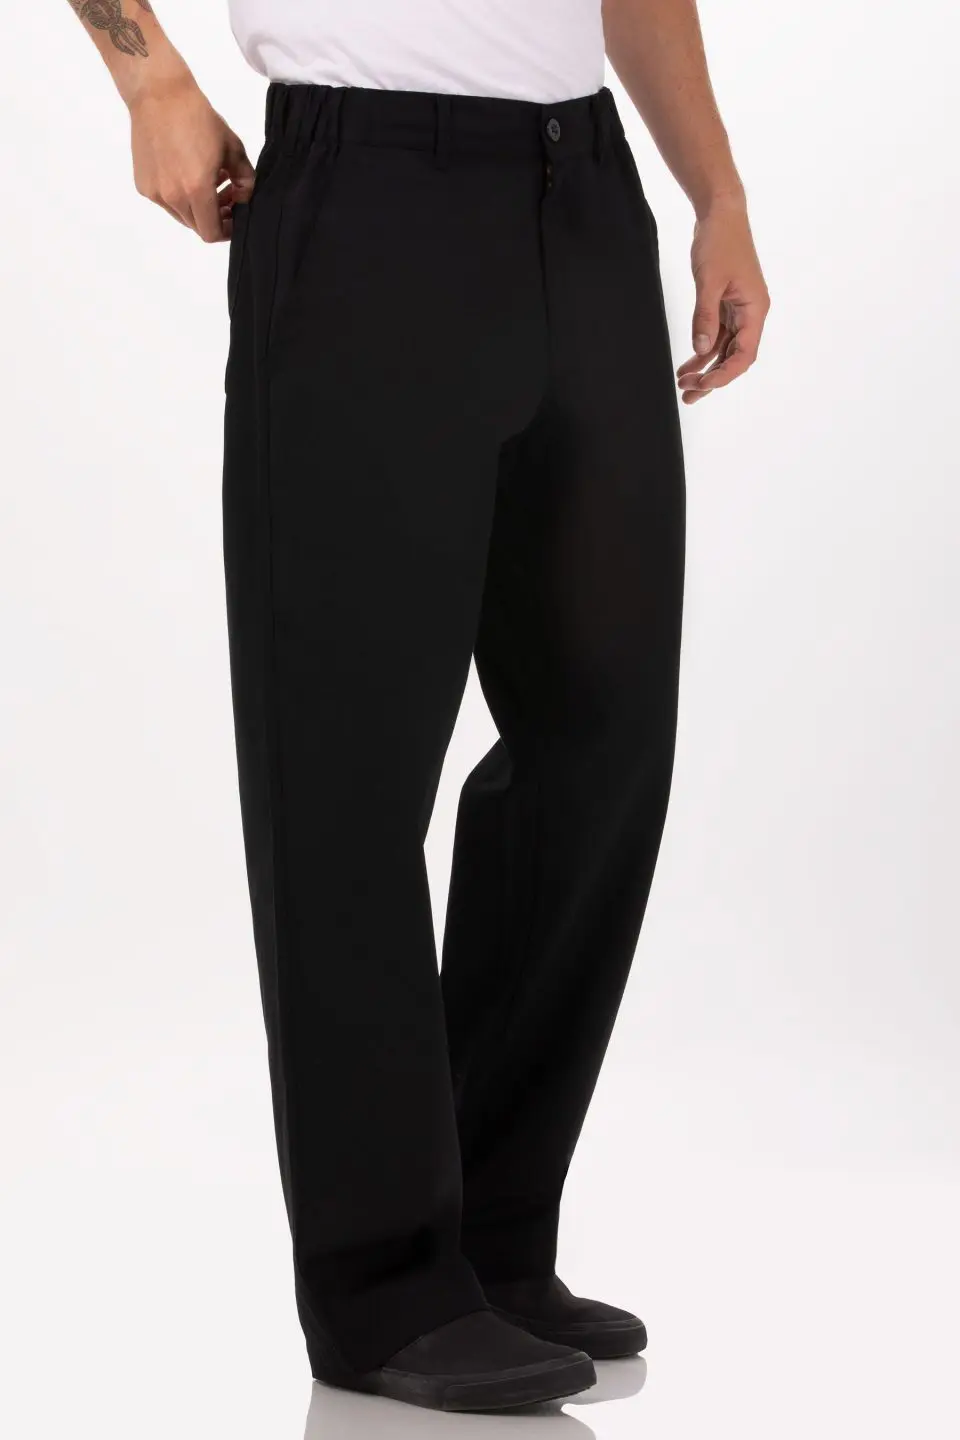 Black Chef Trousers Excellent Quality Elasticated Pants 3 Pockets Black Trousers 